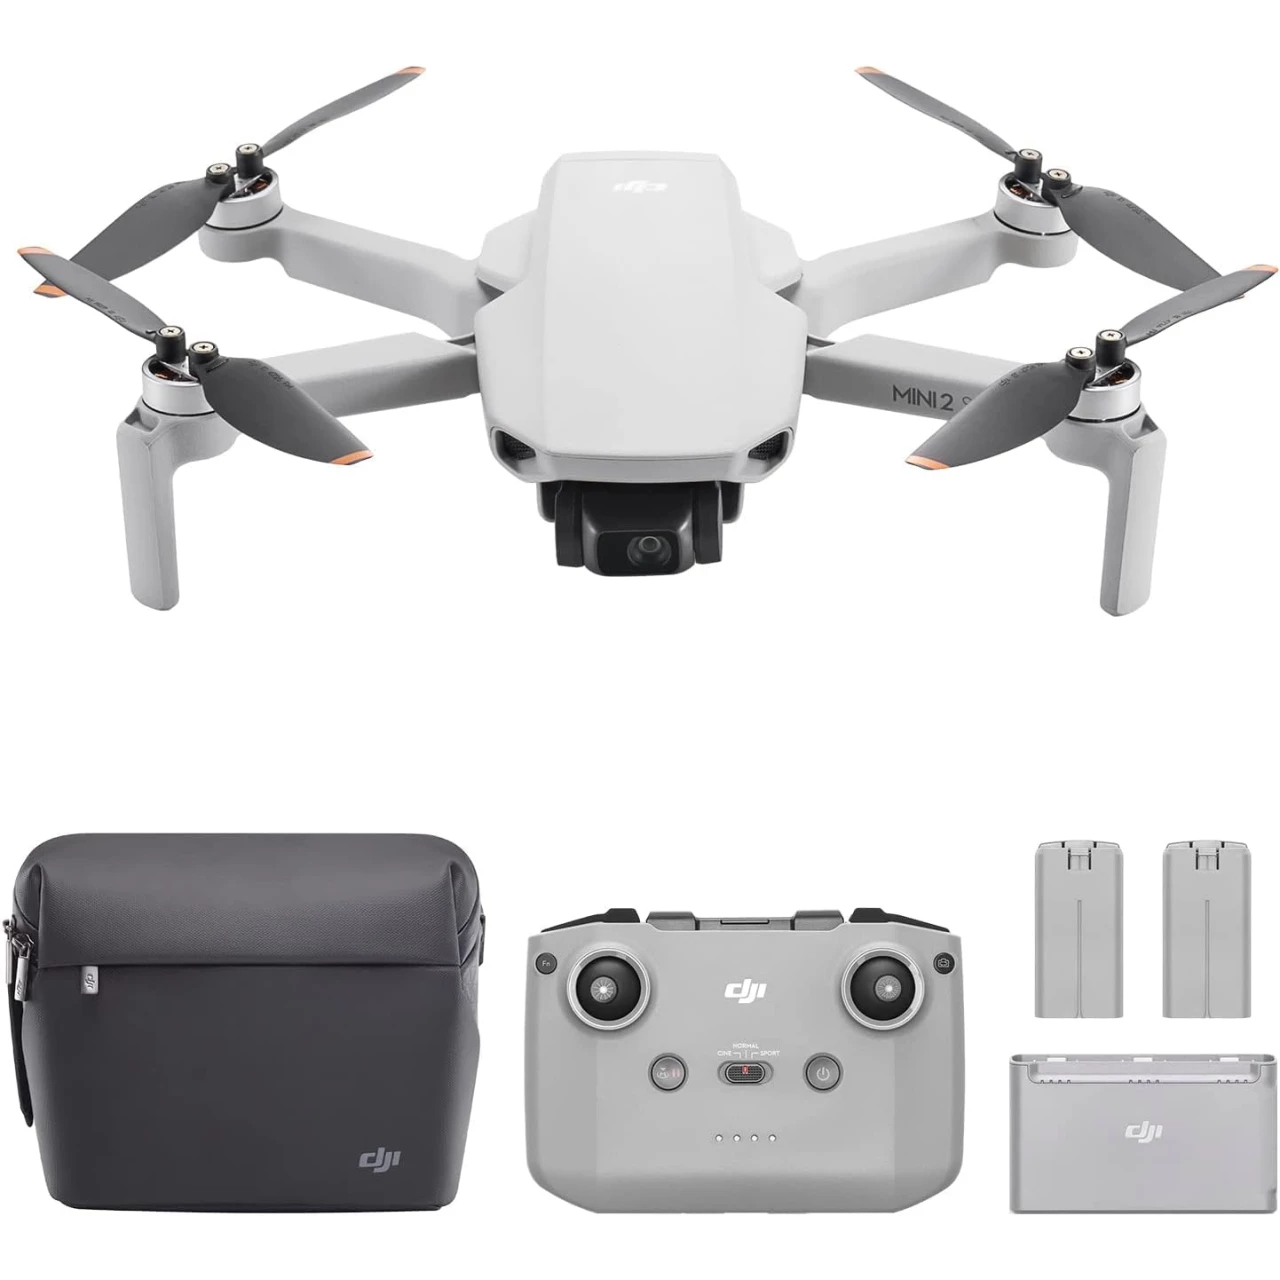 DJI Mini 2 SE Fly More Combo, Lightweight Drone with QHD Video, 10km Video Transmission, 3 Batteries for Total of 93 Mins Flight Time, Under 249 g, Automatic Pro Shots, Camera Drone for Beginners